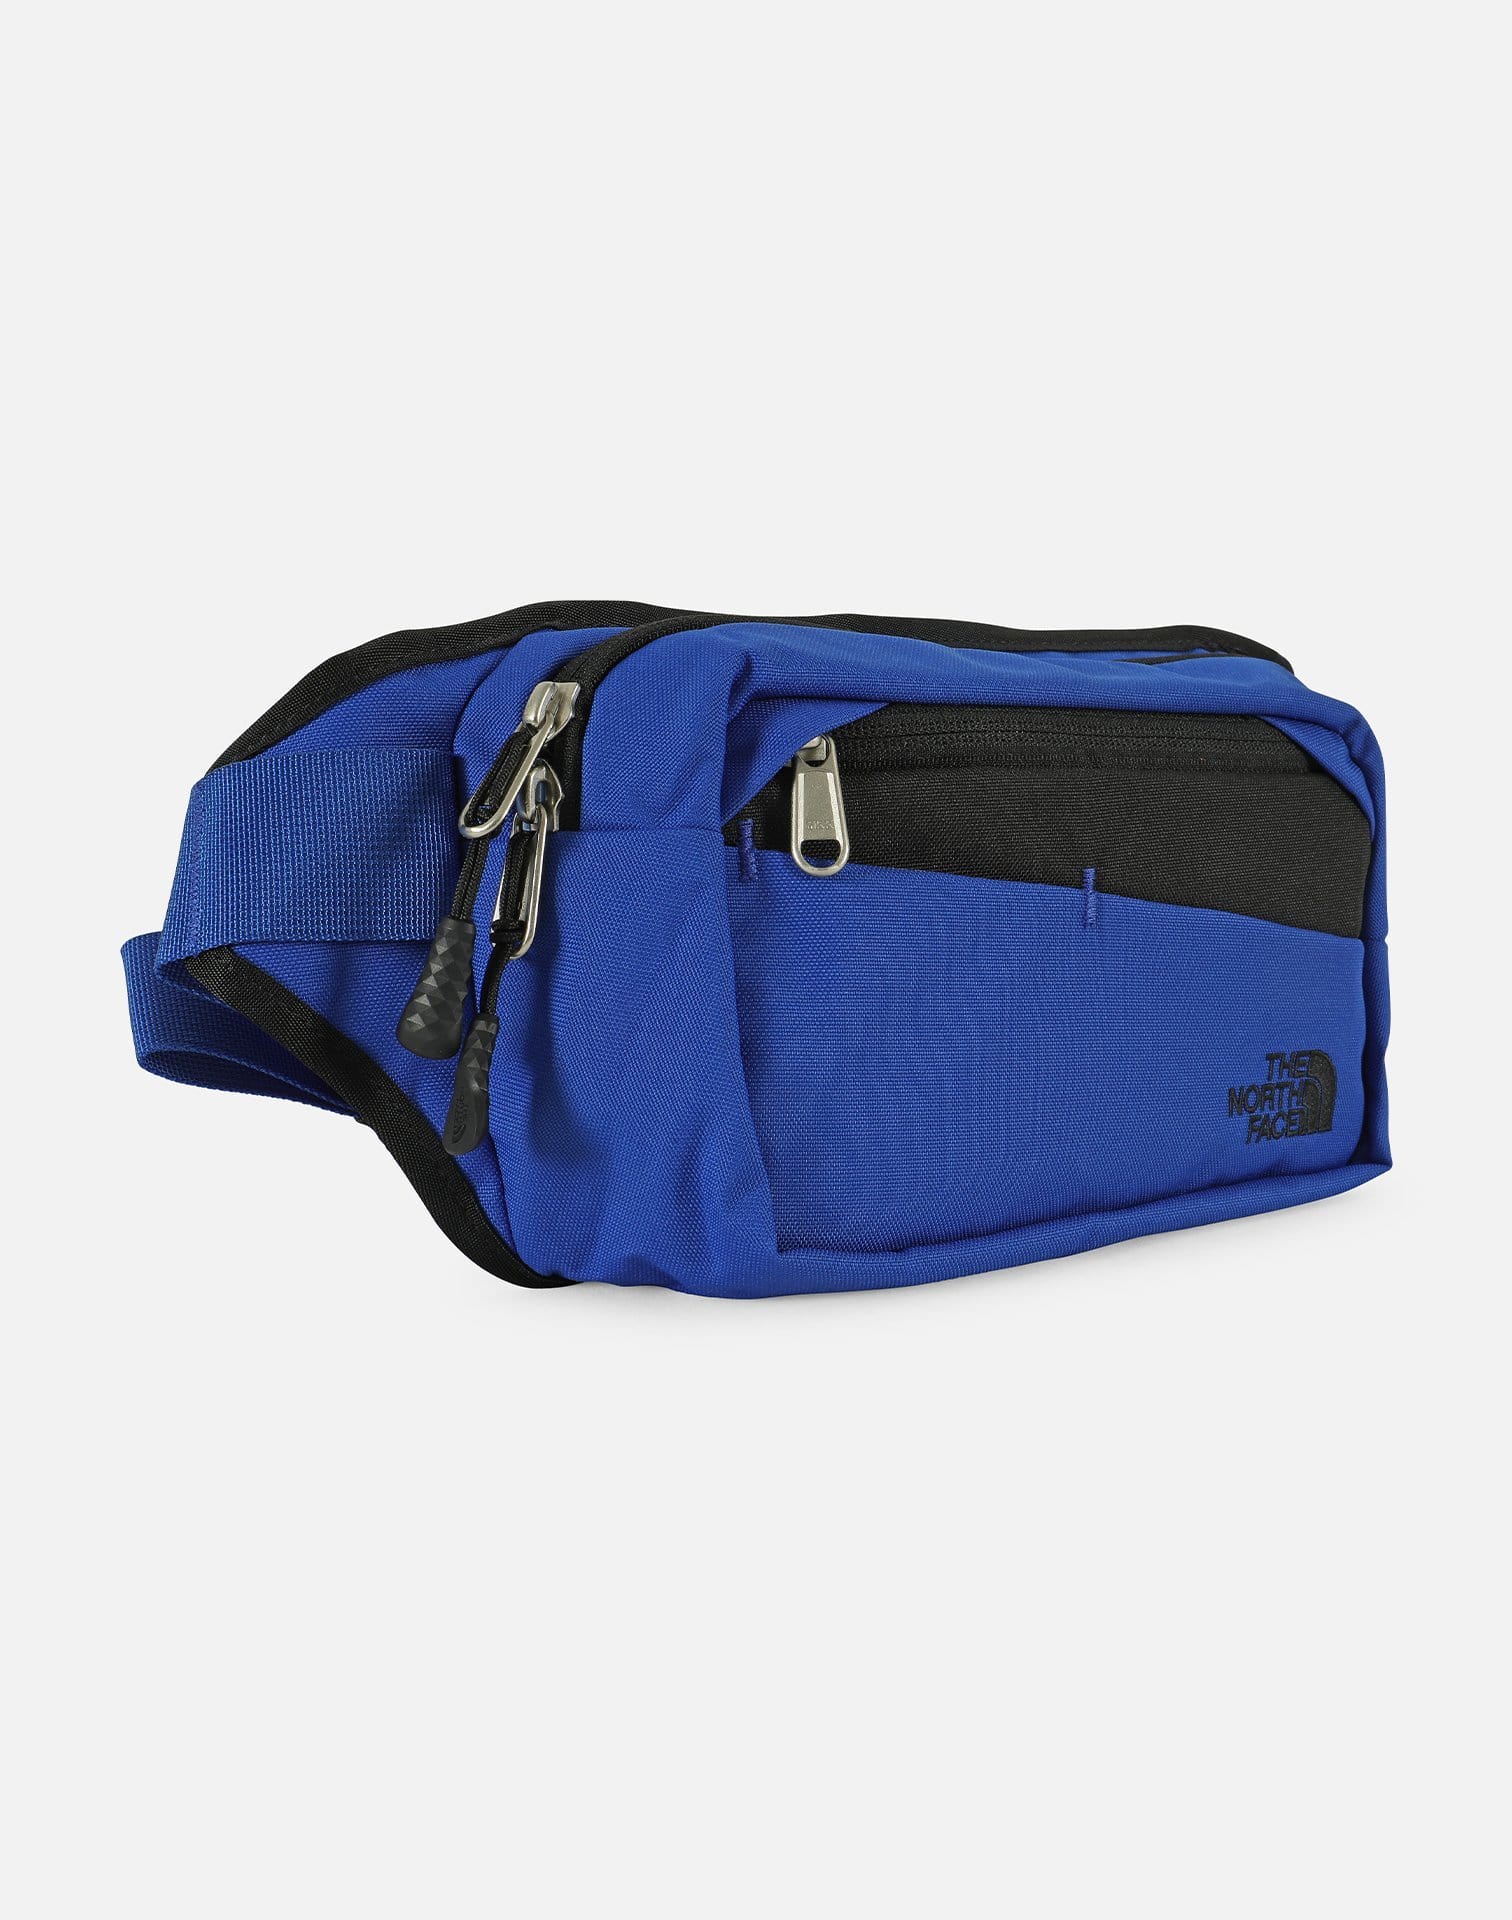 The North Face Boxer Hip Pack